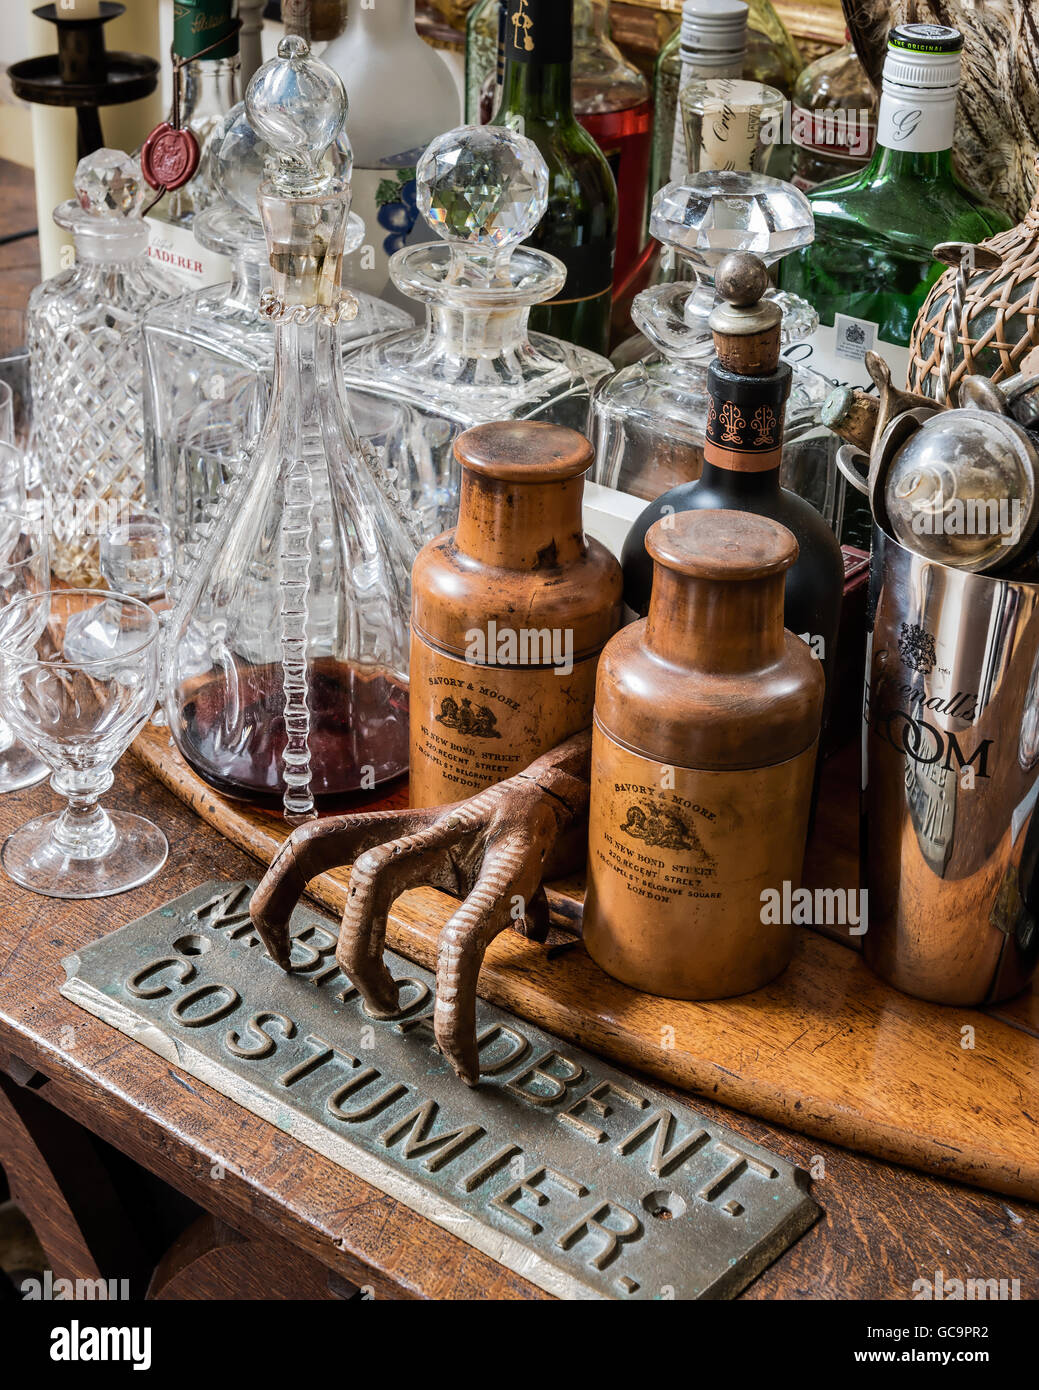 Antique homeware with metal sign and decanters in London apartment, UK Stock Photo